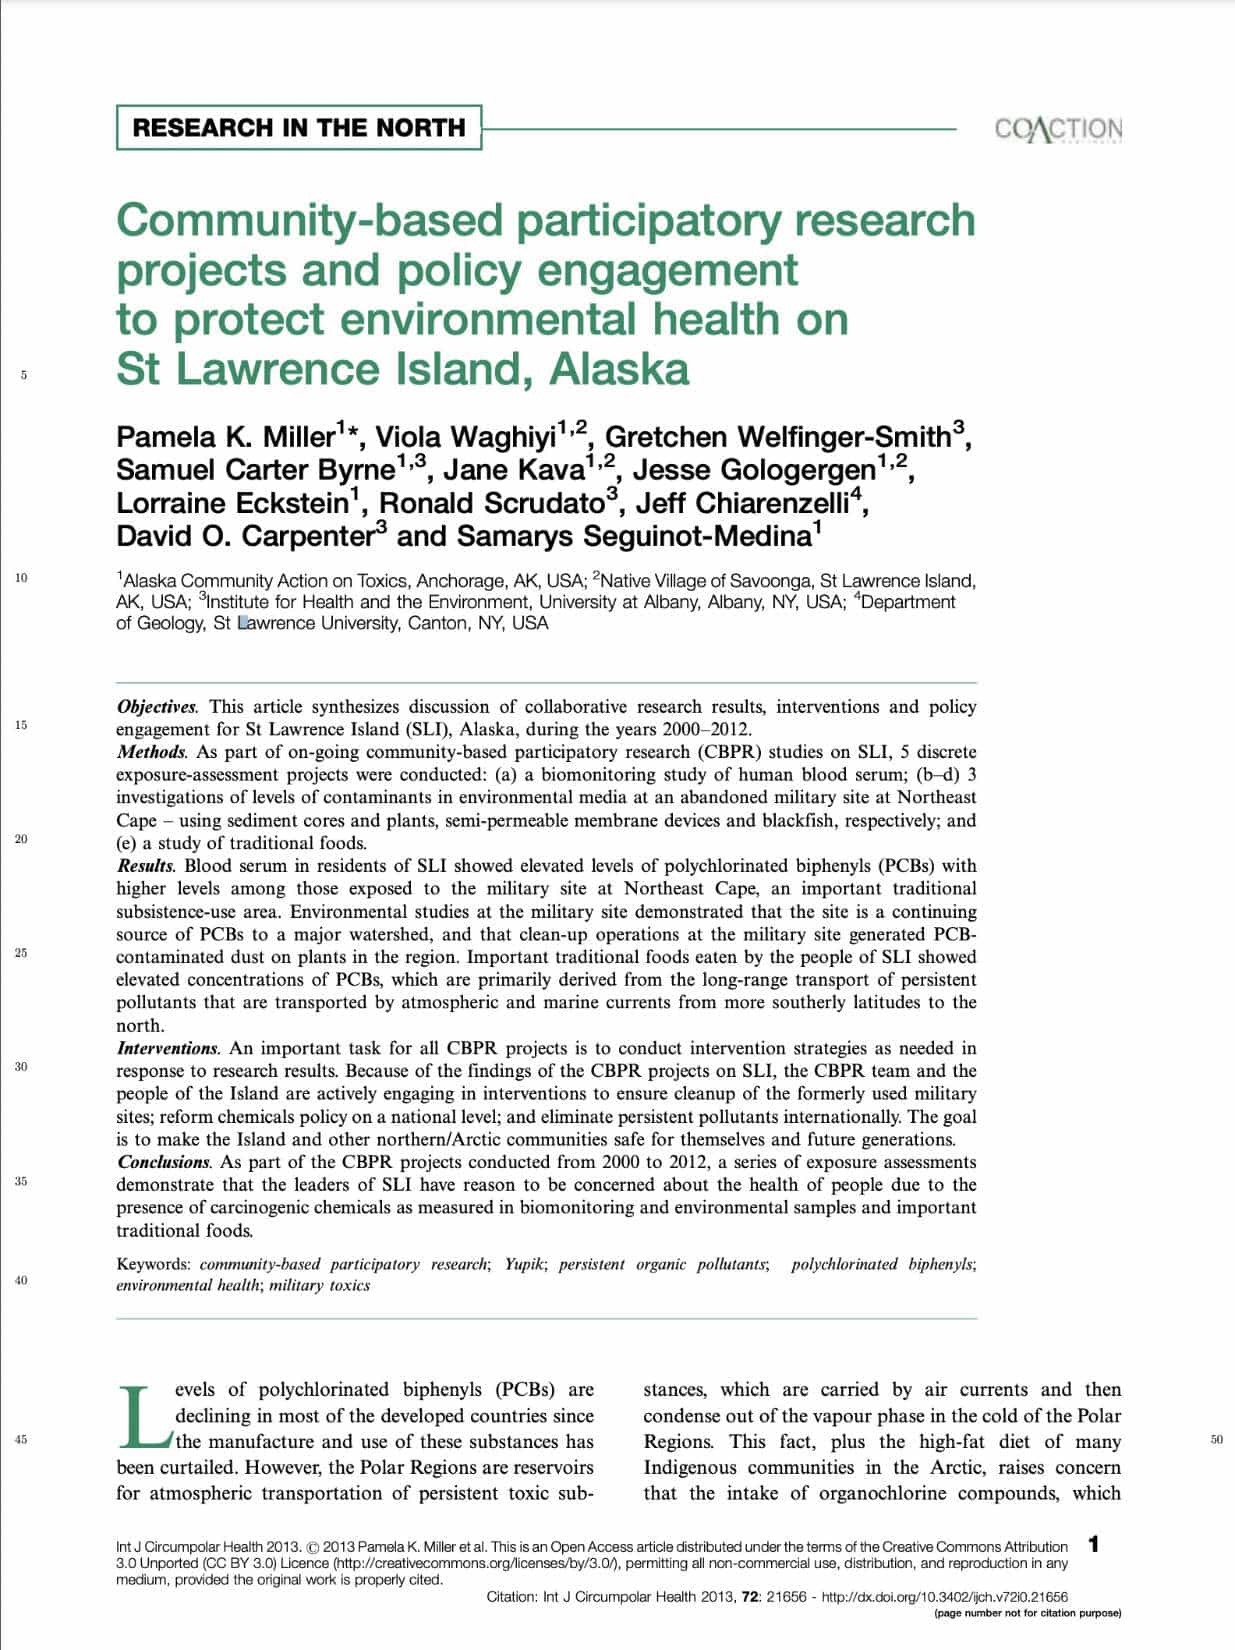 Community-based-participatory-research-projects-and-policy-engagement-to-protect-environmental-health-on-St-Lawrence-Island-,Alaska